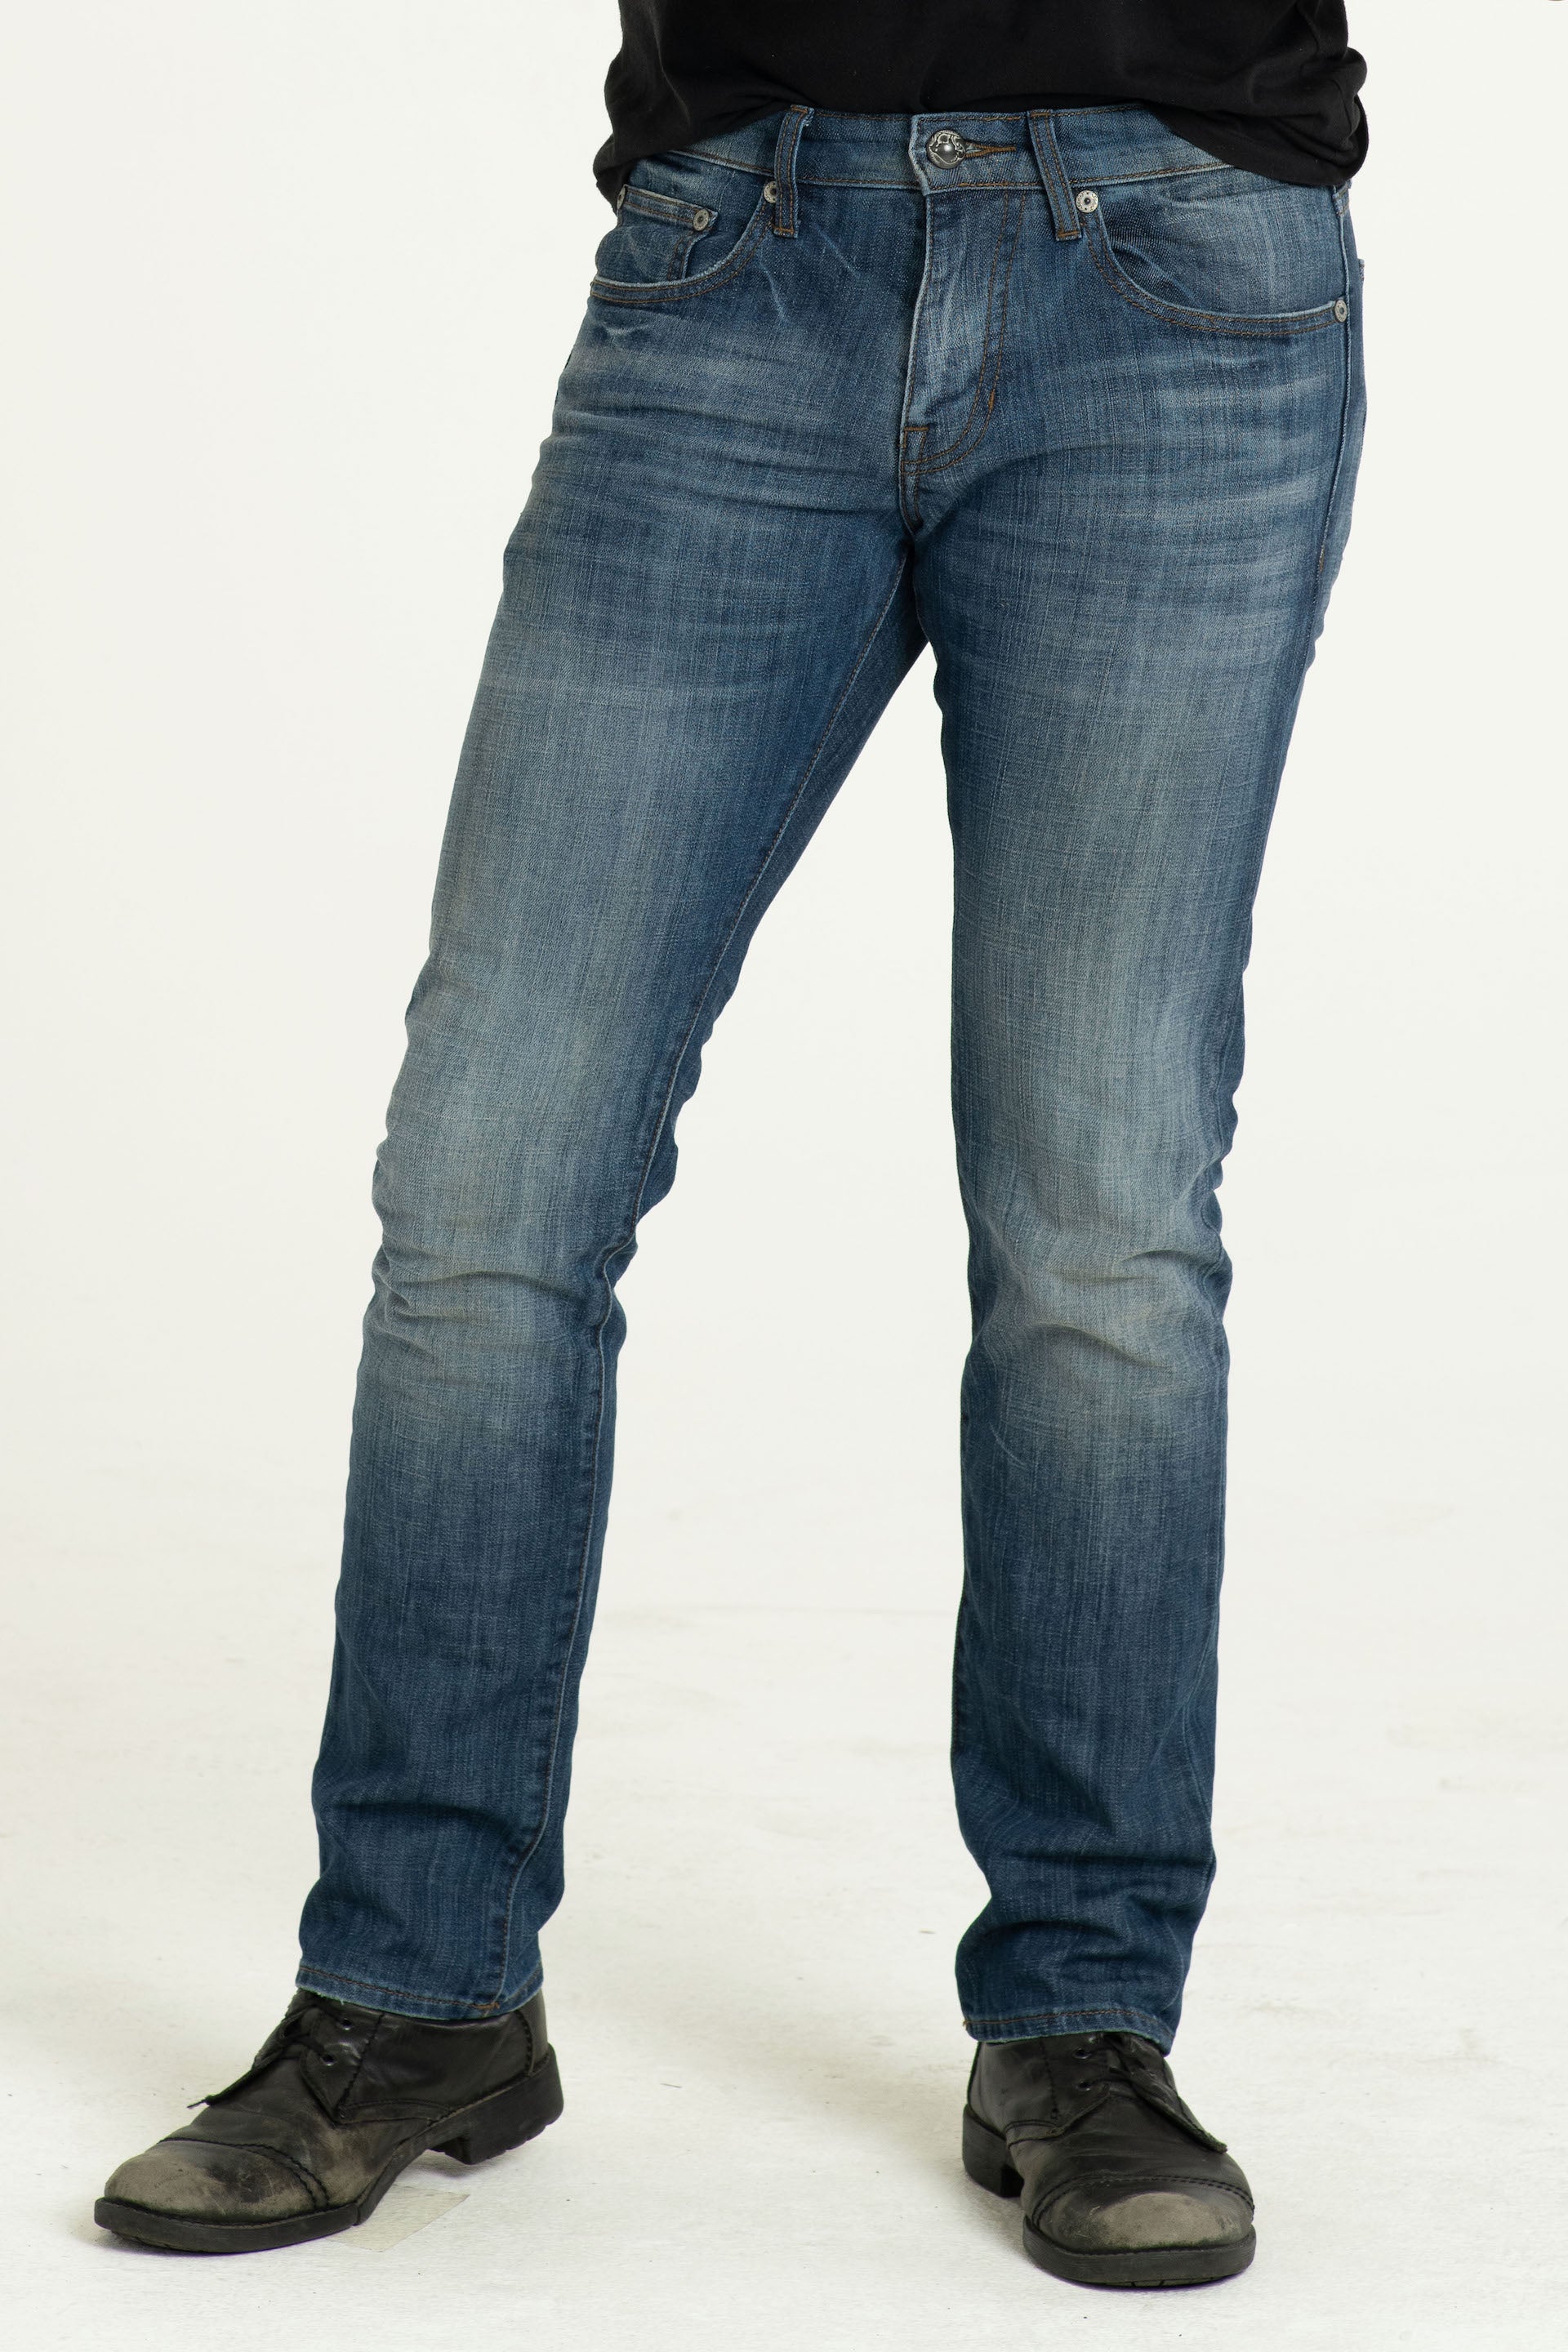 BARFLY SLIM JEANS IN WASTED BLUES